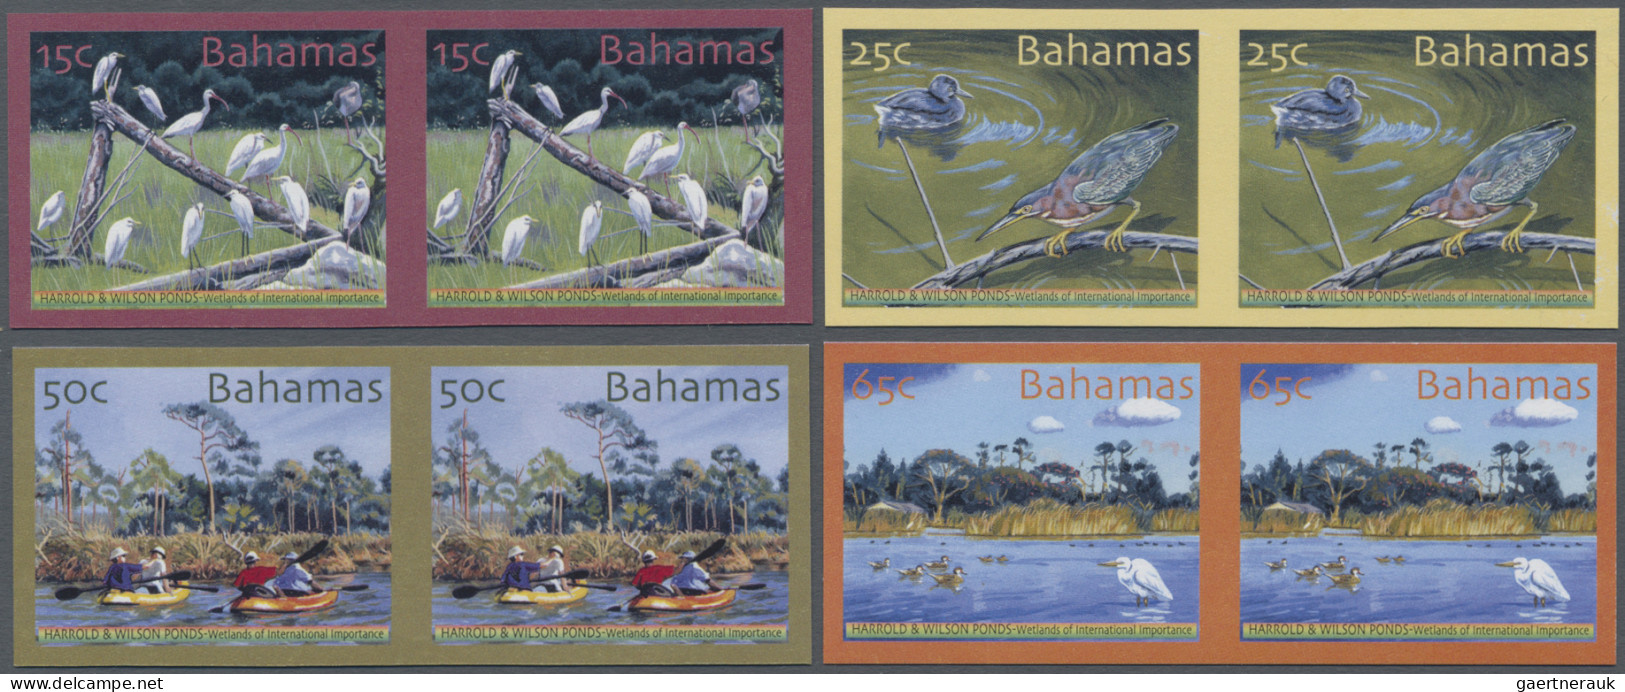 Bahamas: 1999/2013. Collection containing 2956 IMPERFORATE stamps and 34 IMPERFO